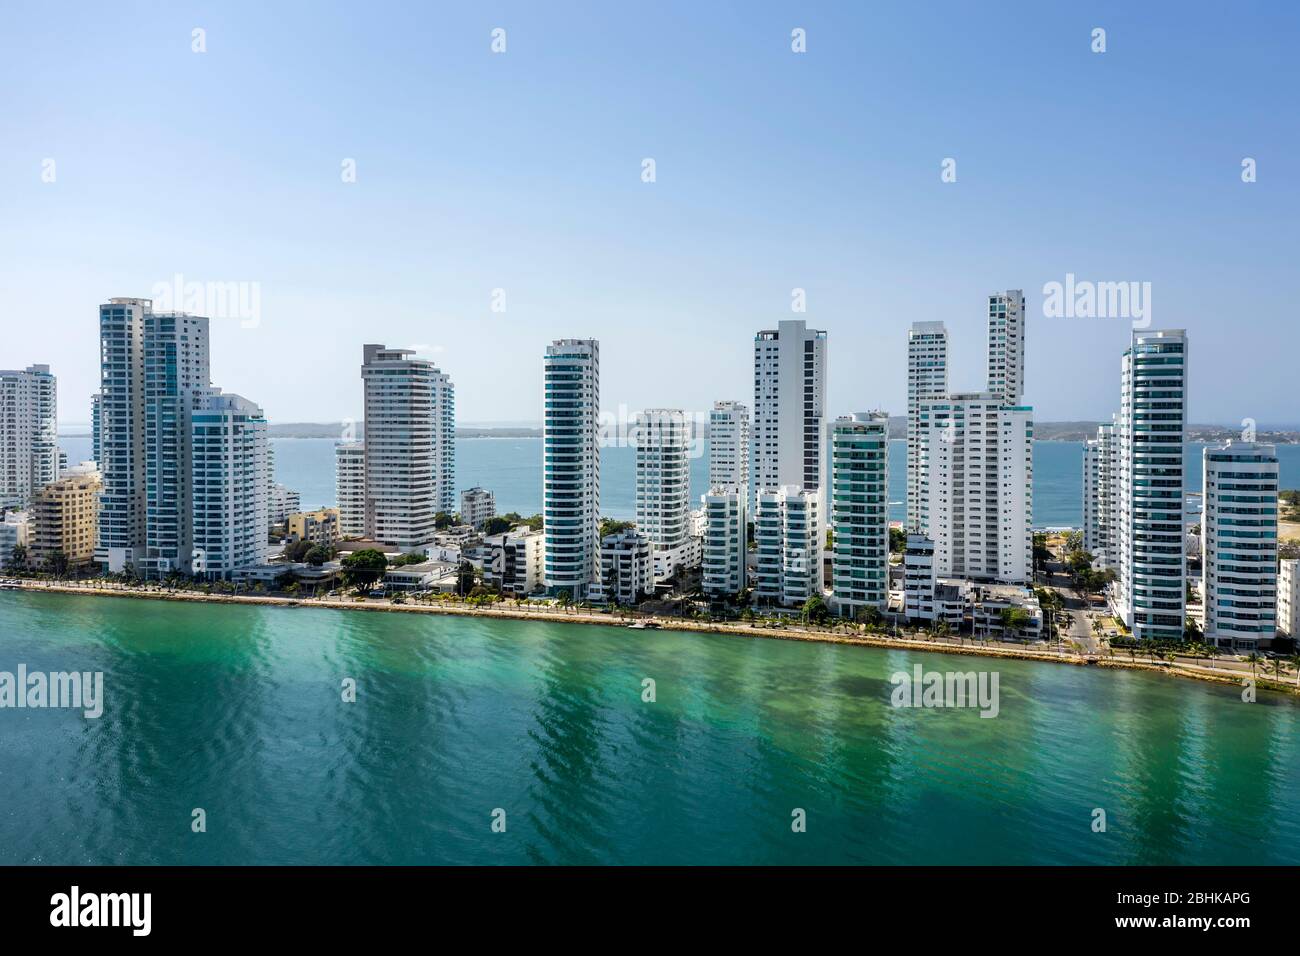 Aerial View of the hotels and tall apartment buildings near the Caribbean coast. Modern City Skyline. Stock Photo